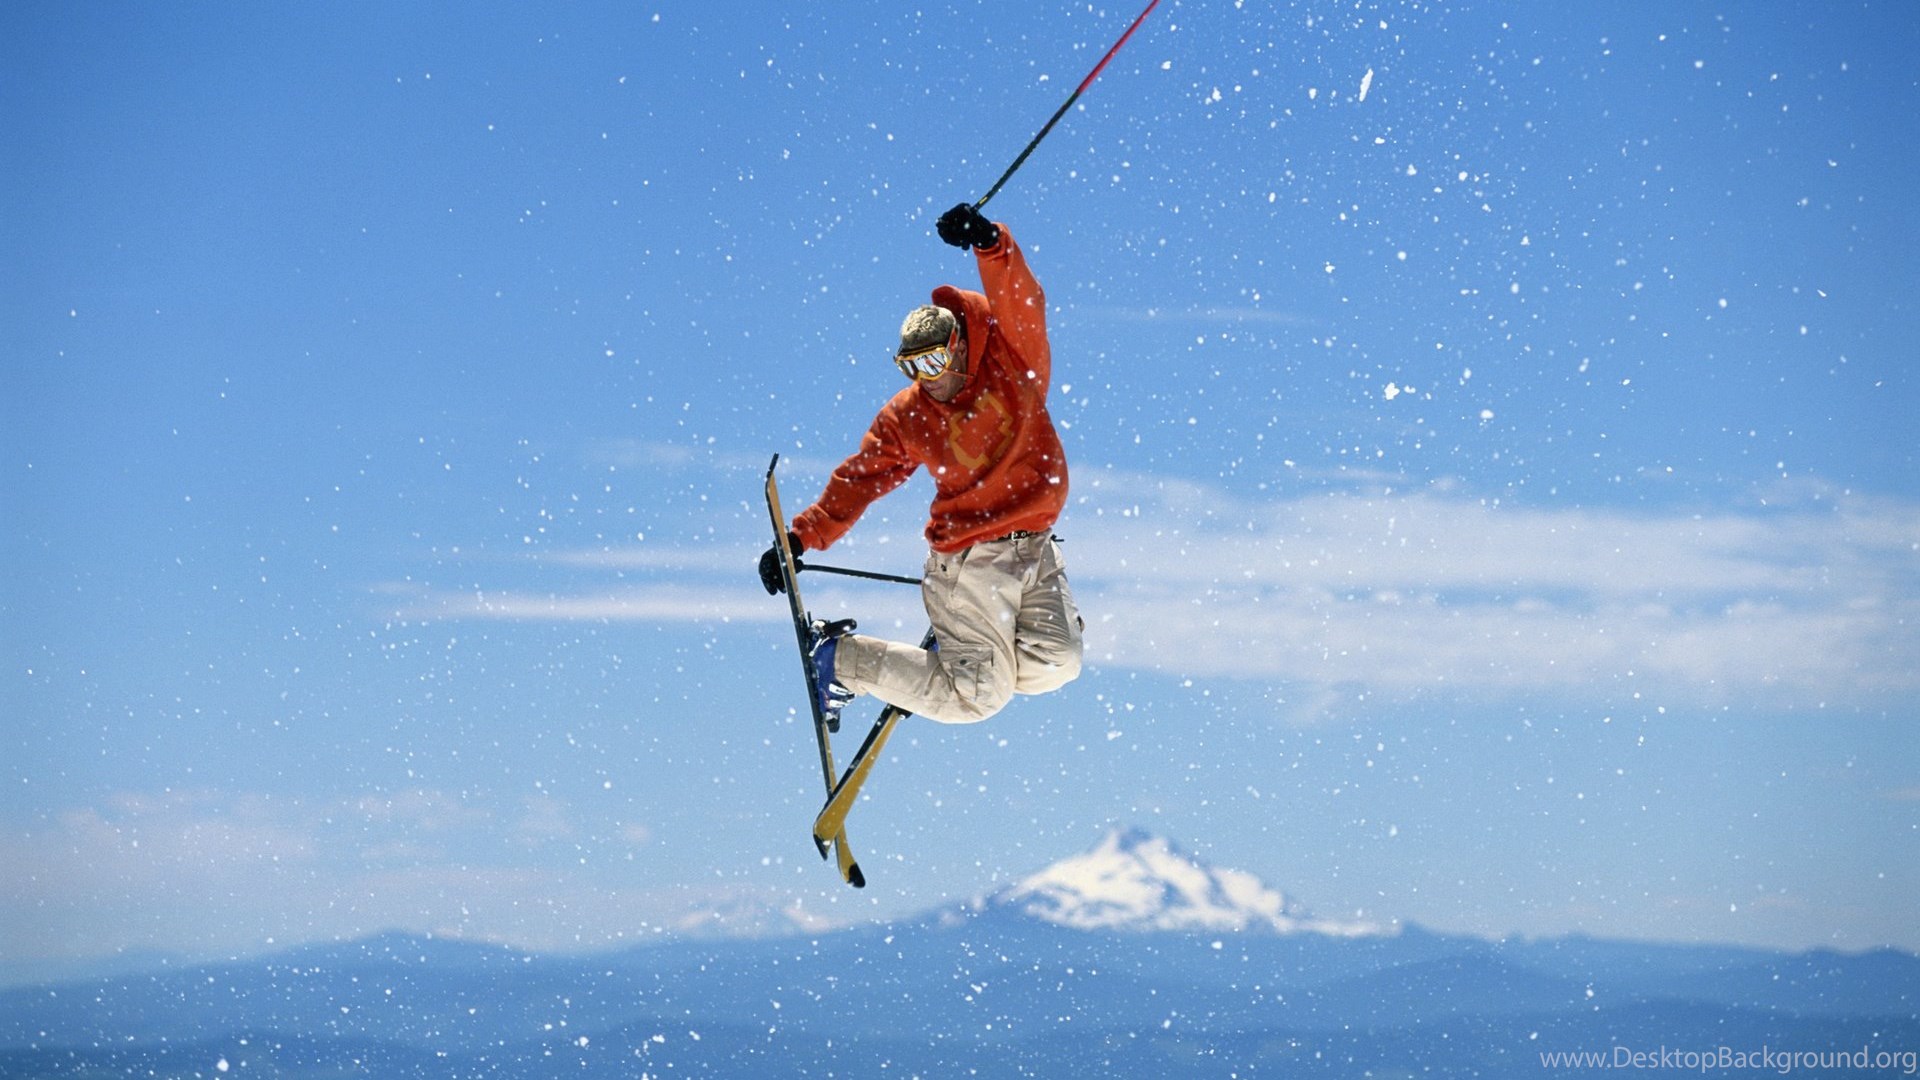 Freestyle Skiing Wallpapers